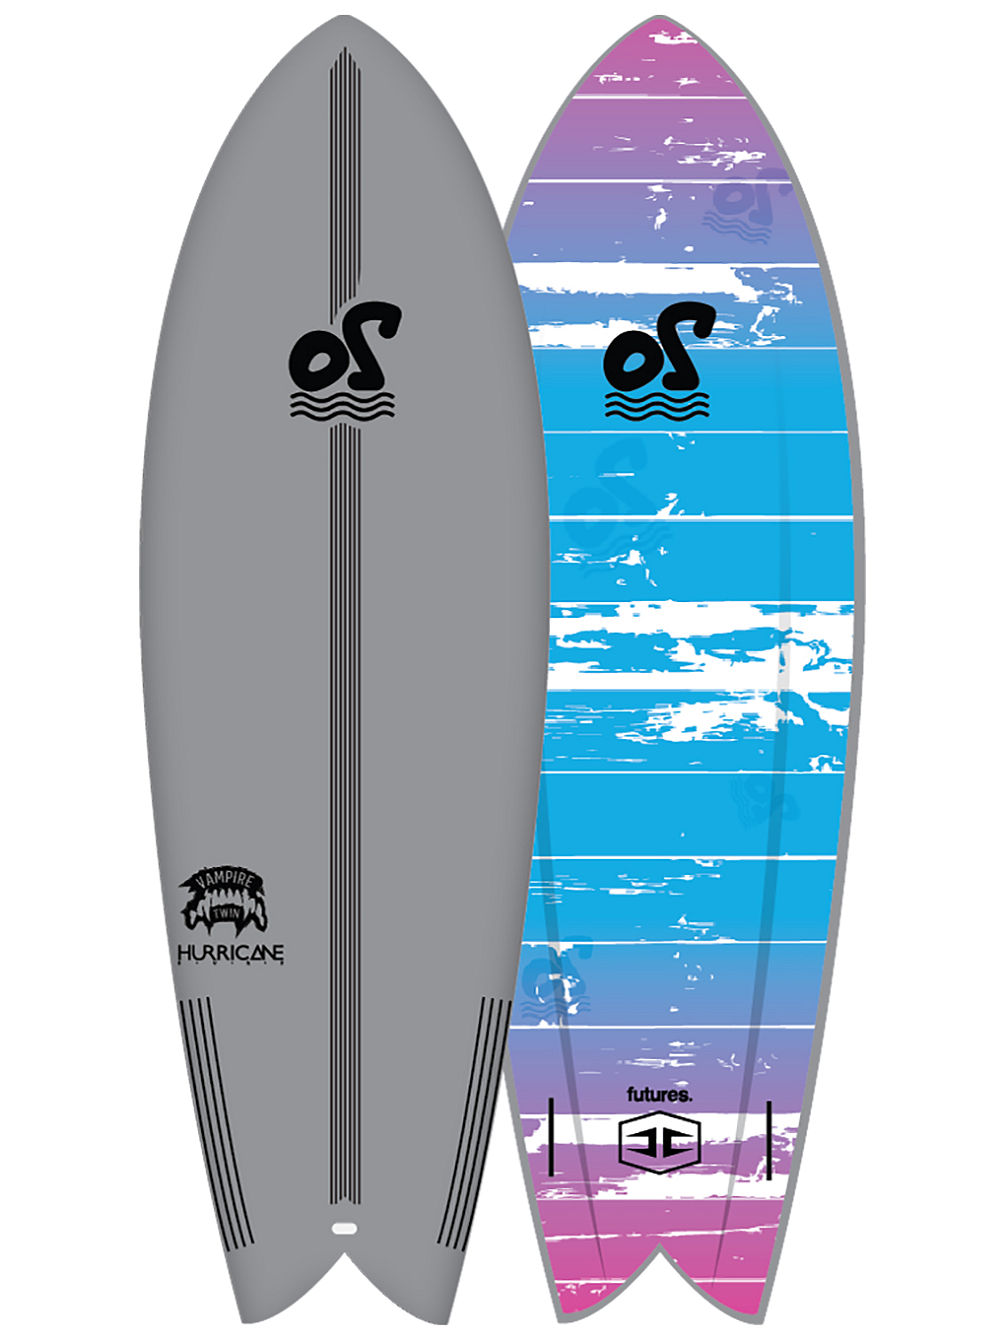 Vampire Twin 6&amp;#039;0 Softtop Surfboard